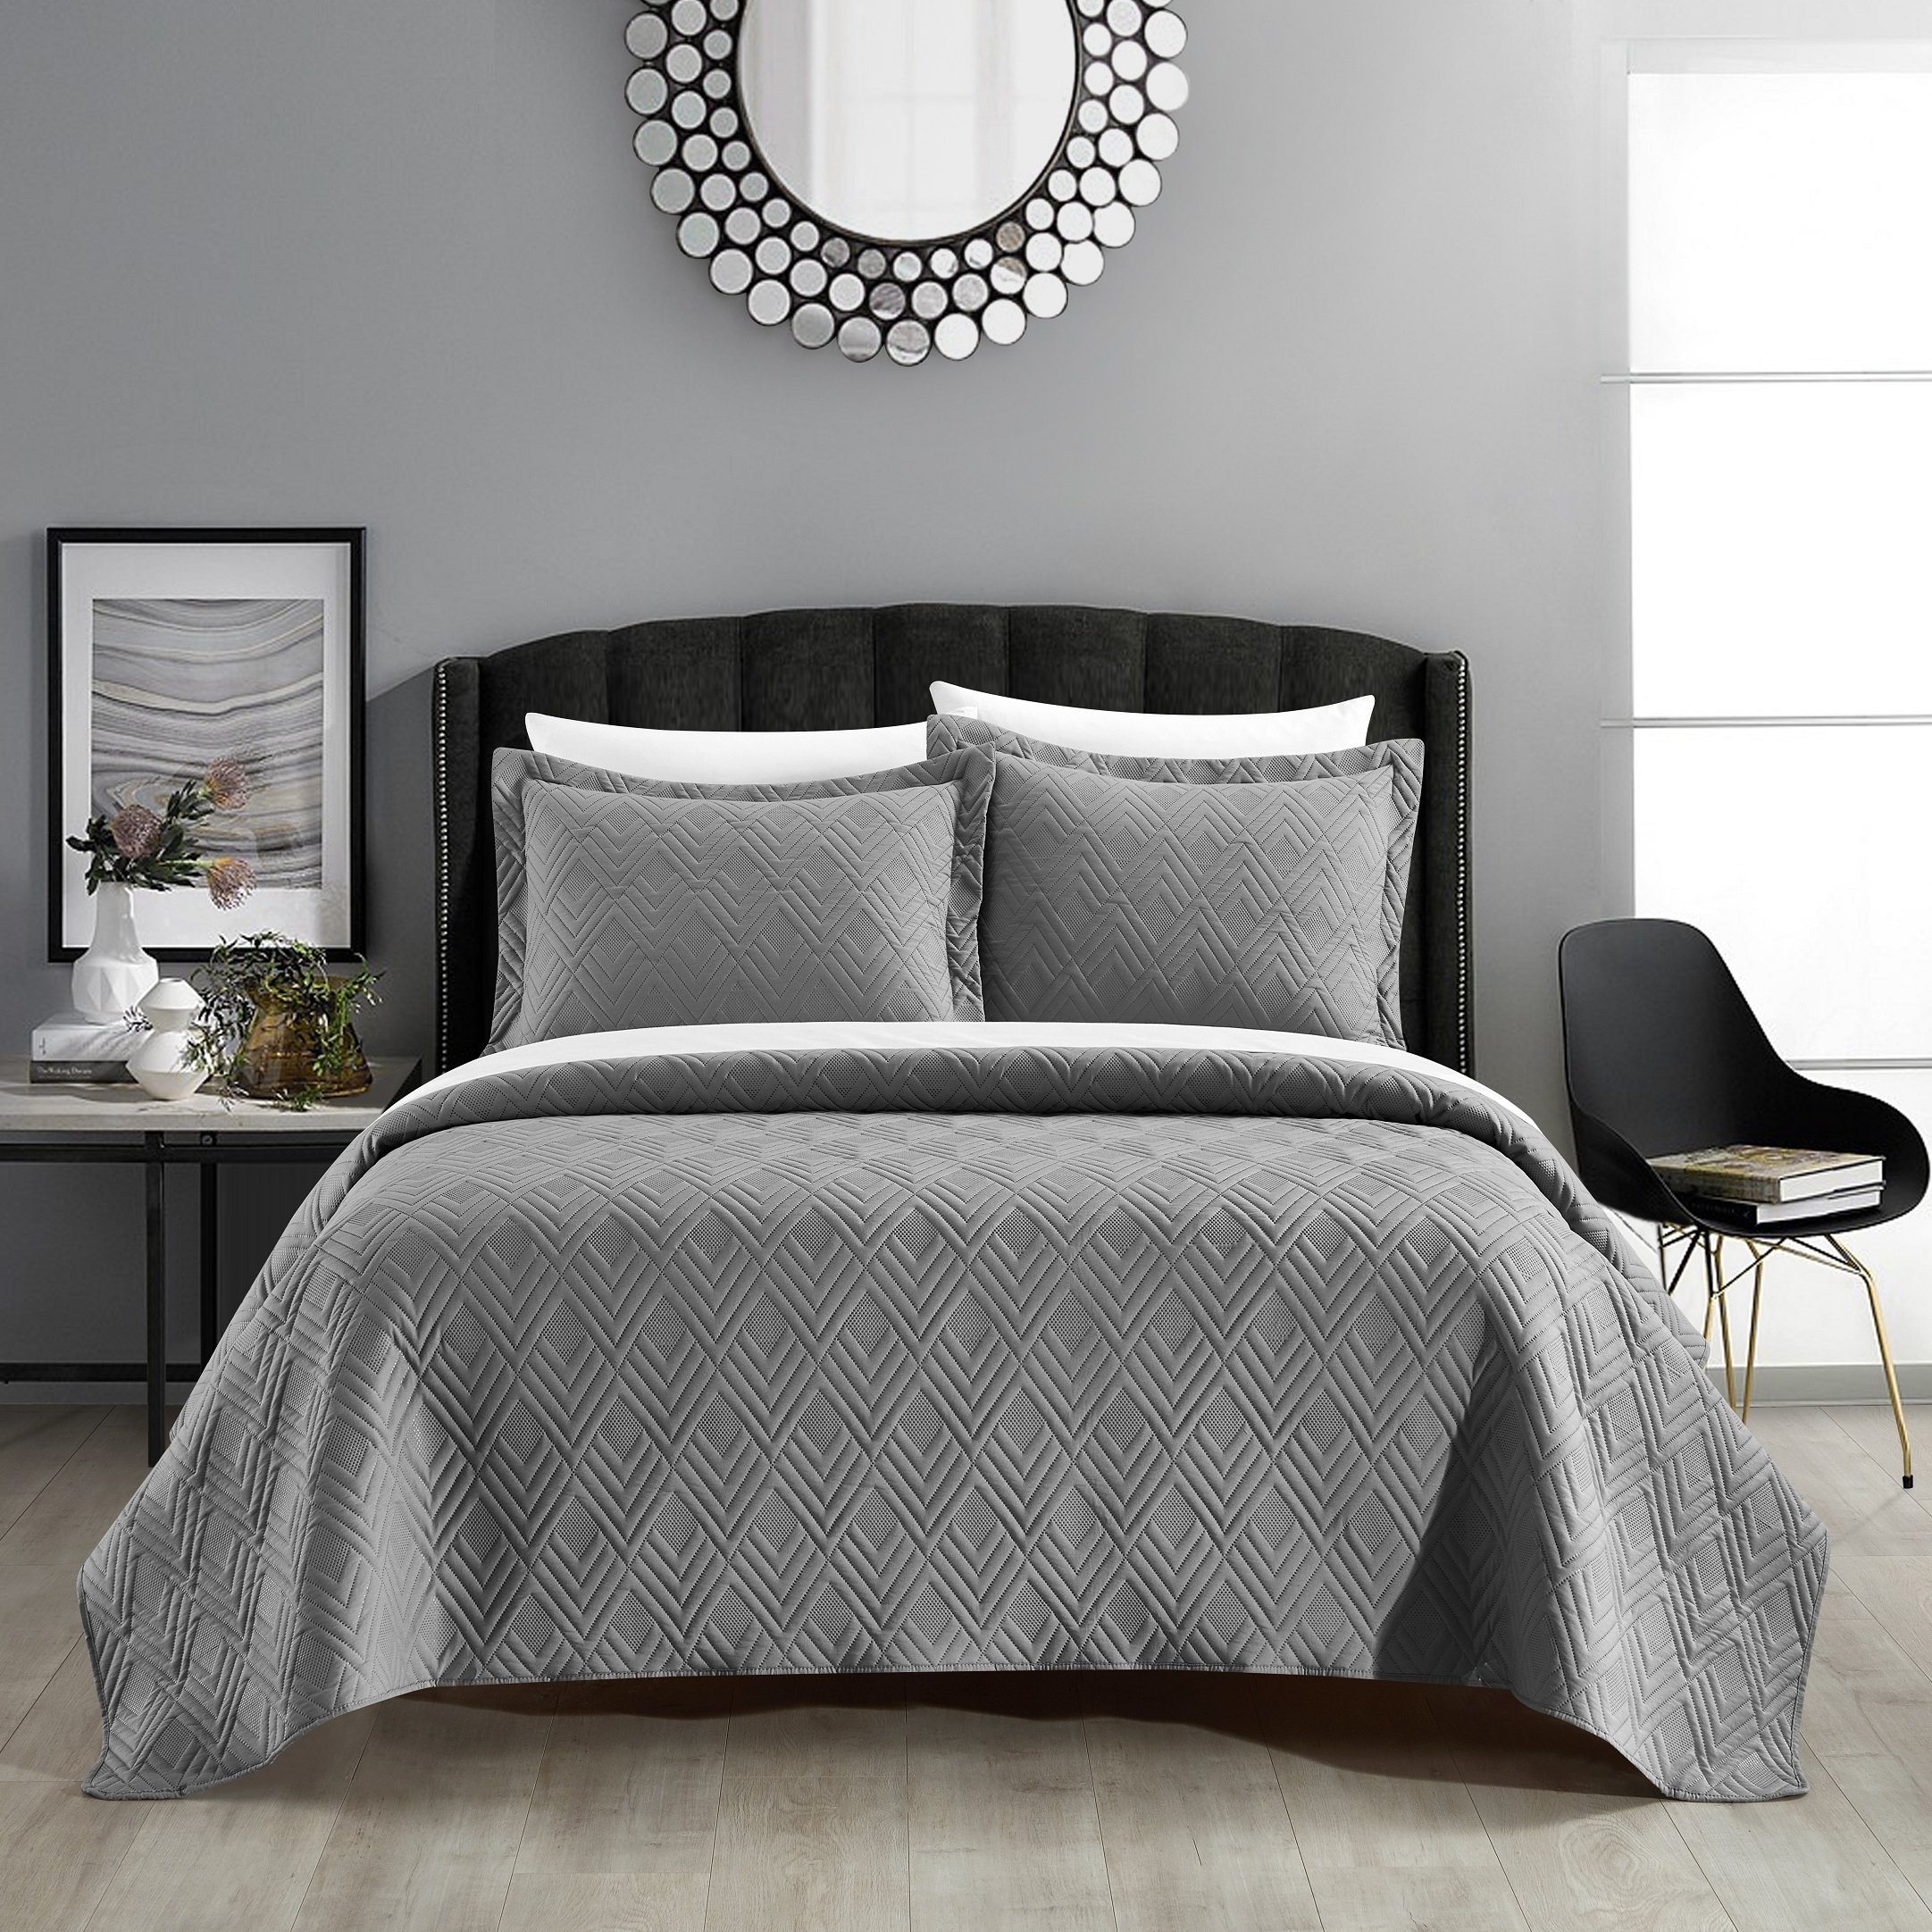 NY&CO Ahling 3 Piece Quilt Set Contemporary Geometric Diamond Pattern Bedding - Grey, Queen